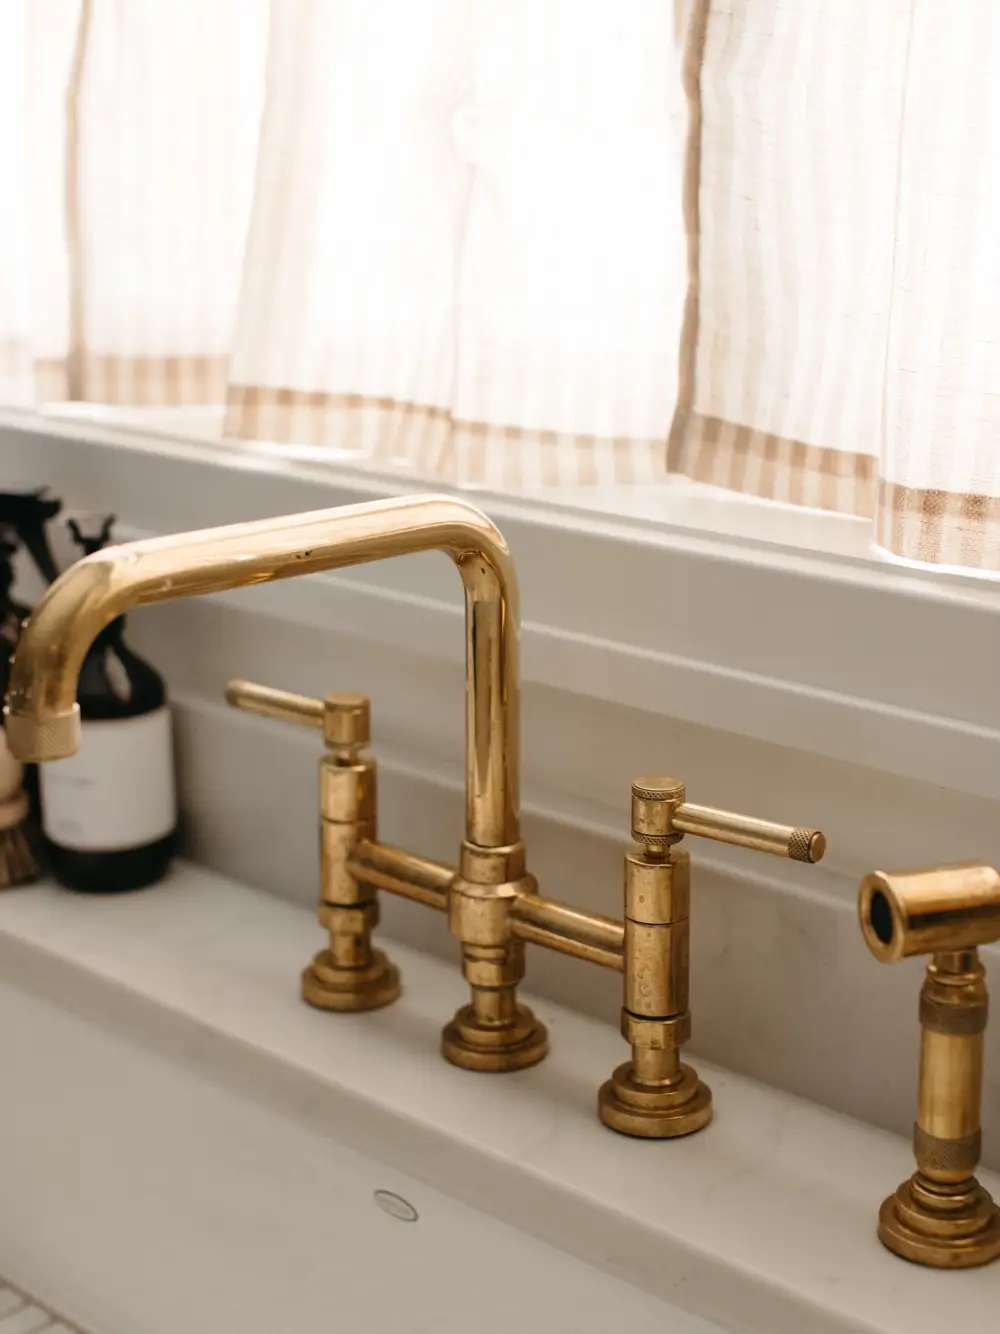 Yes, unlacquered brass will agebut in the very best way. The patina on  our Easton faucet in a…